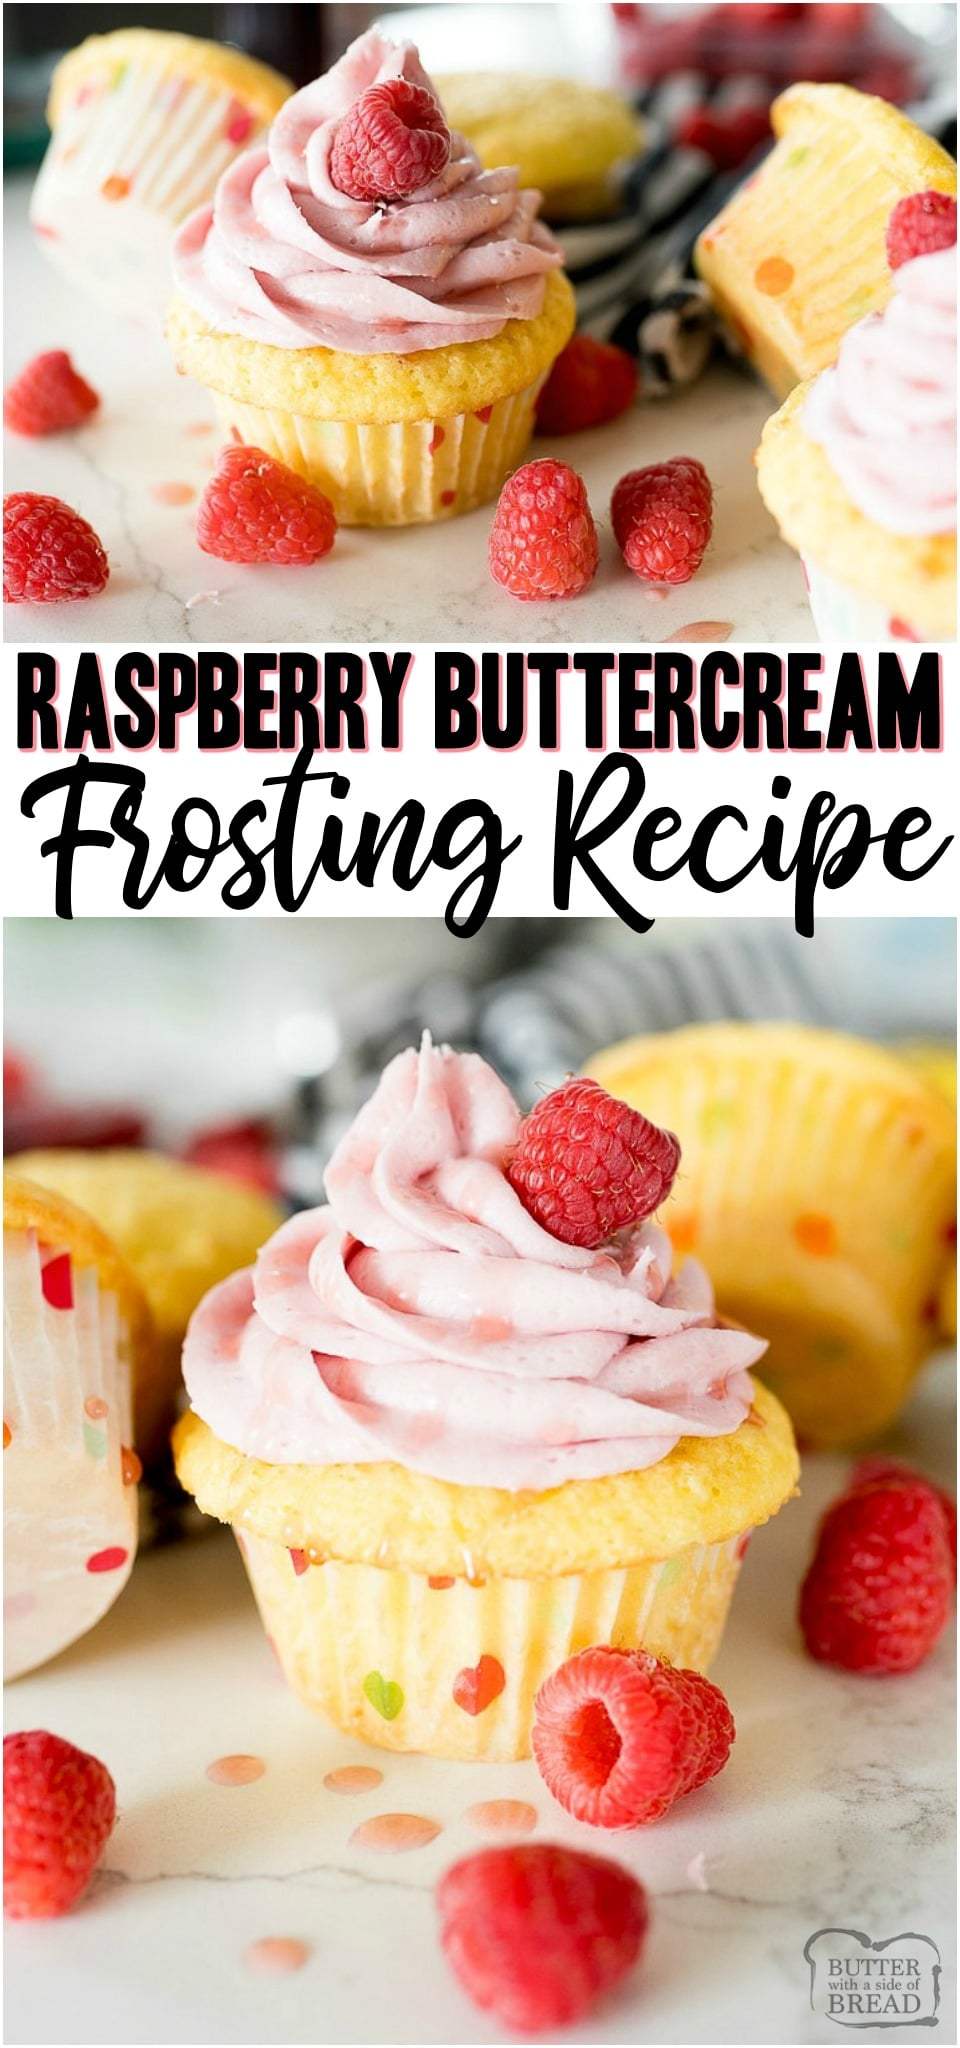 Raspberry Buttercream Frosting is a homemade frosting recipe made with butter, powdered sugar and raspberry jam! Perfect for topping cakes, cupcakes, or sweet rolls! #raspberry #frosting #buttercream #berries #dessert #recipe from BUTTER WITH A SIDE OF BREAD